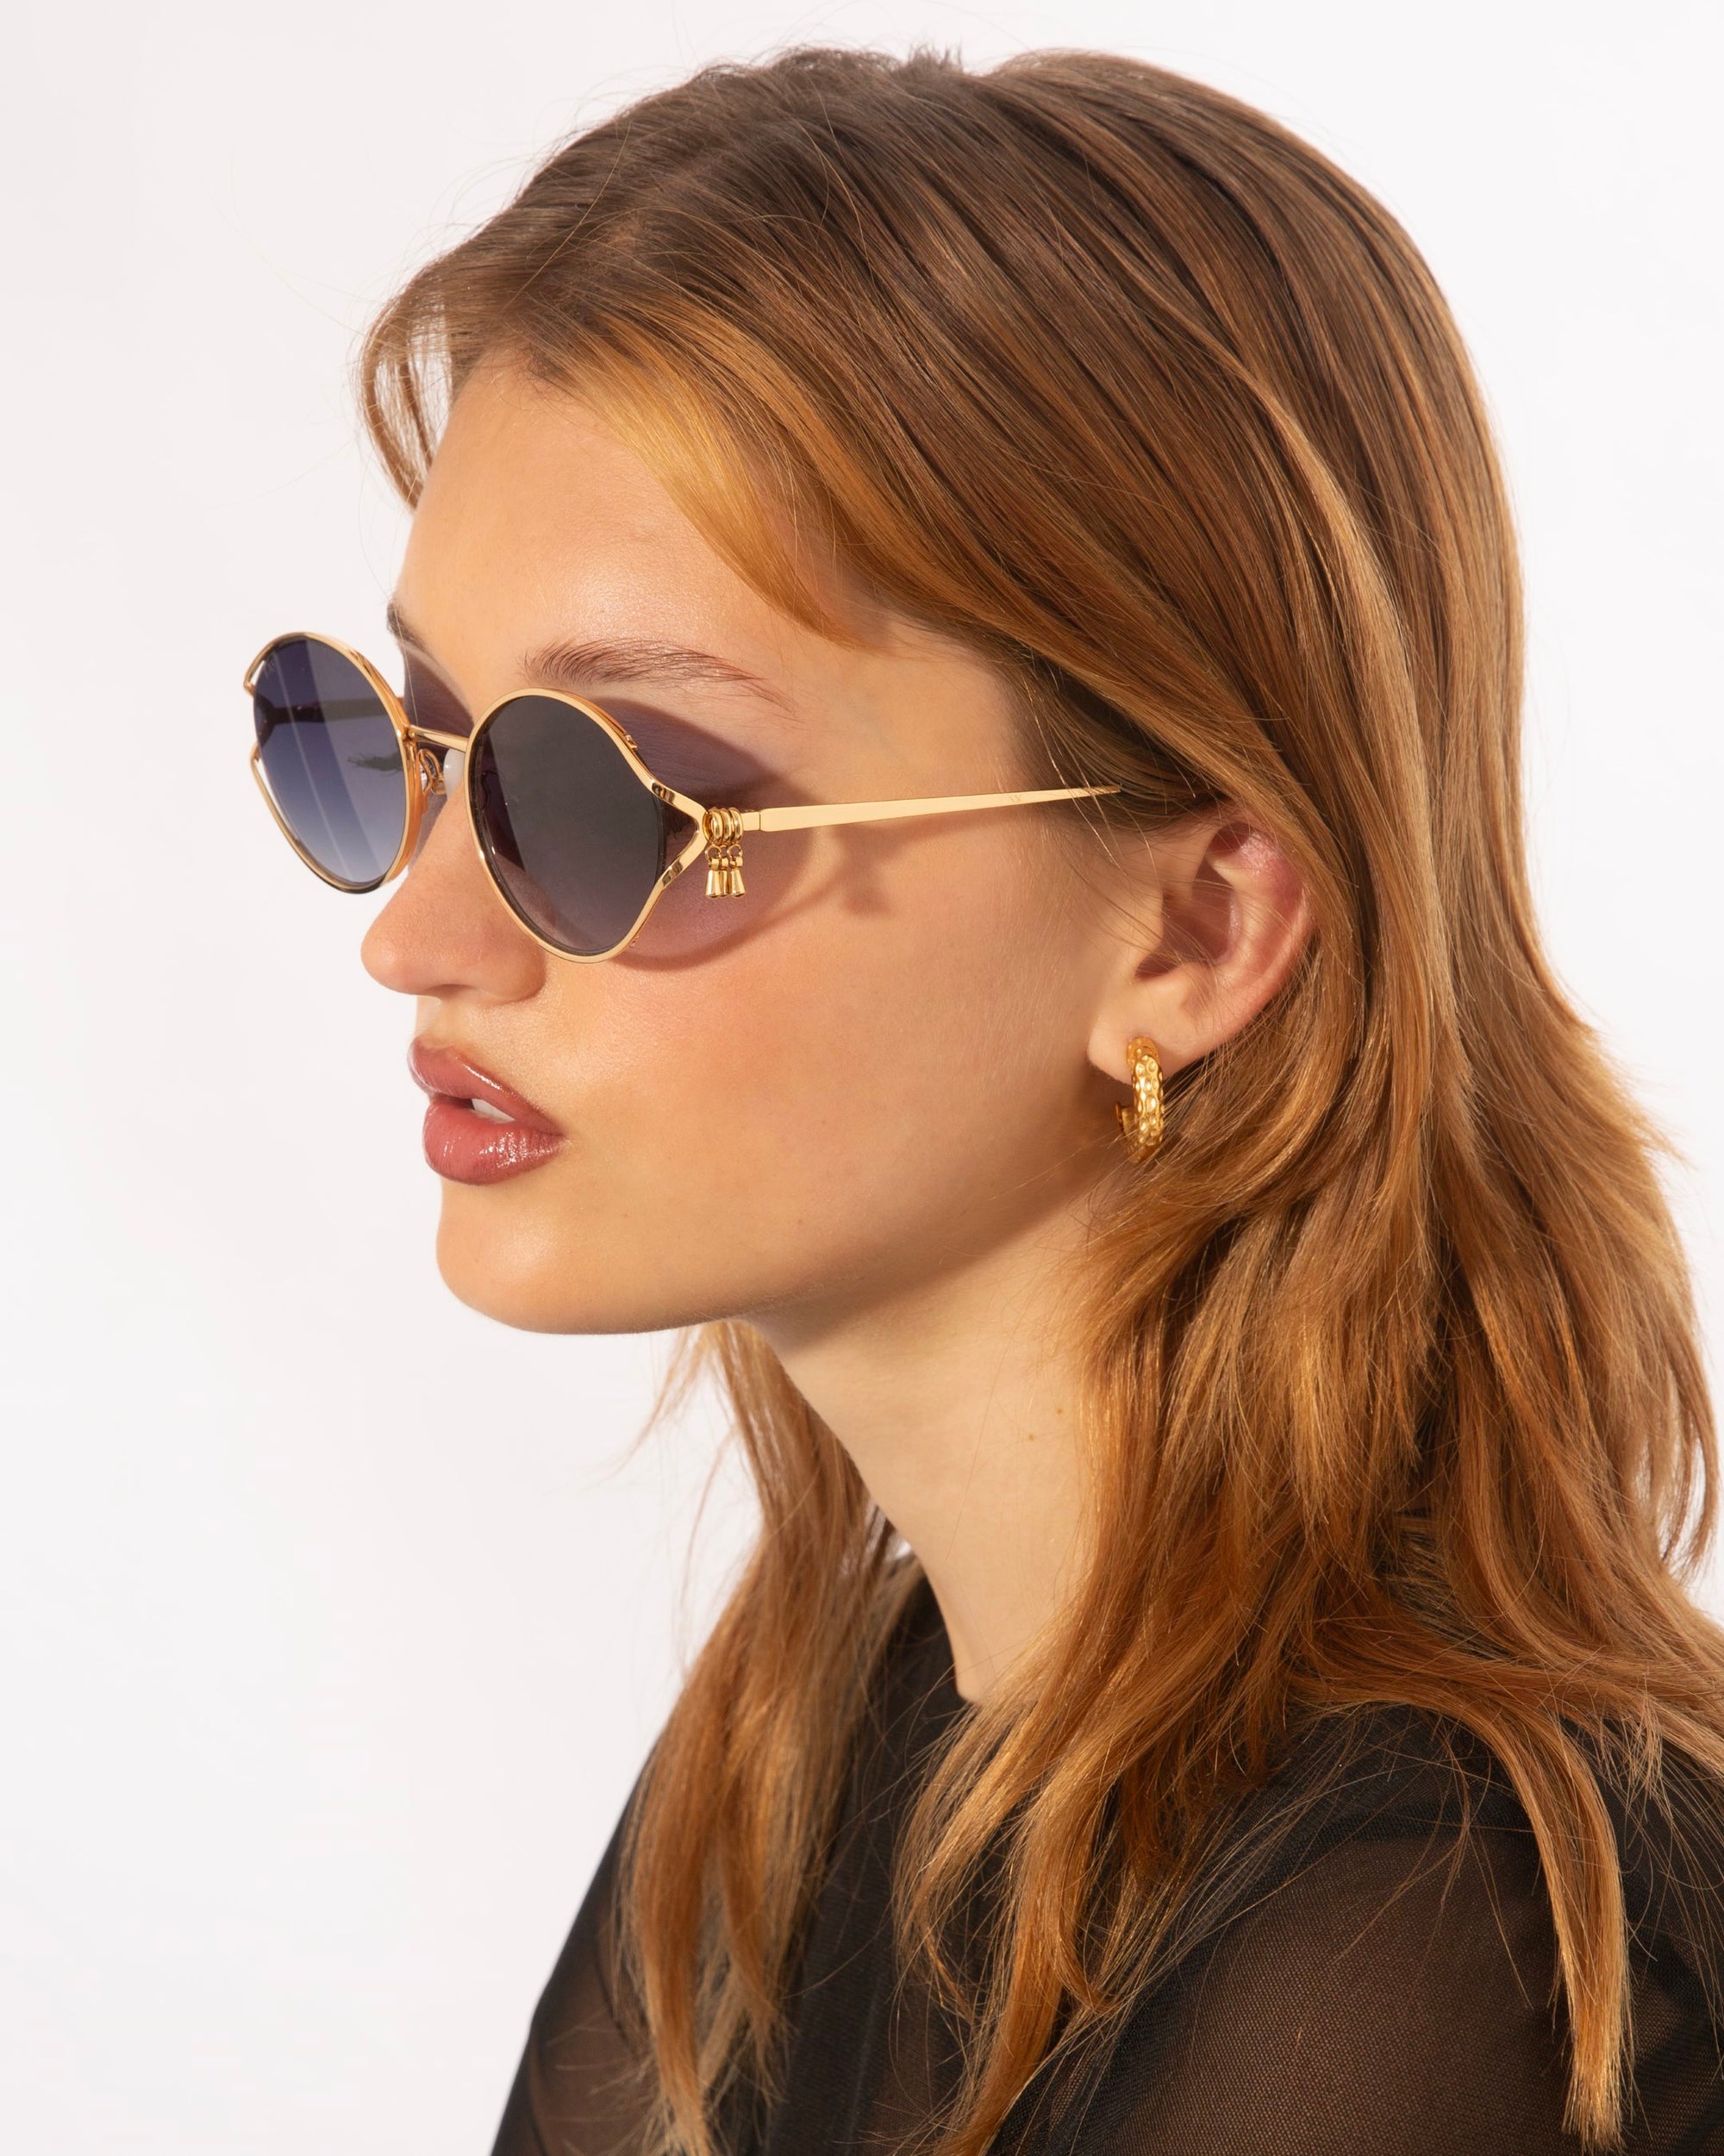 A young person with long, light brown hair is wearing round, dark For Art&#39;s Sake® Sky sunglasses adorned with jade-stone nose pads and small hoop earrings with 18-karat gold plating. They are looking off to the side, and their lips are slightly parted. The background is plain white.